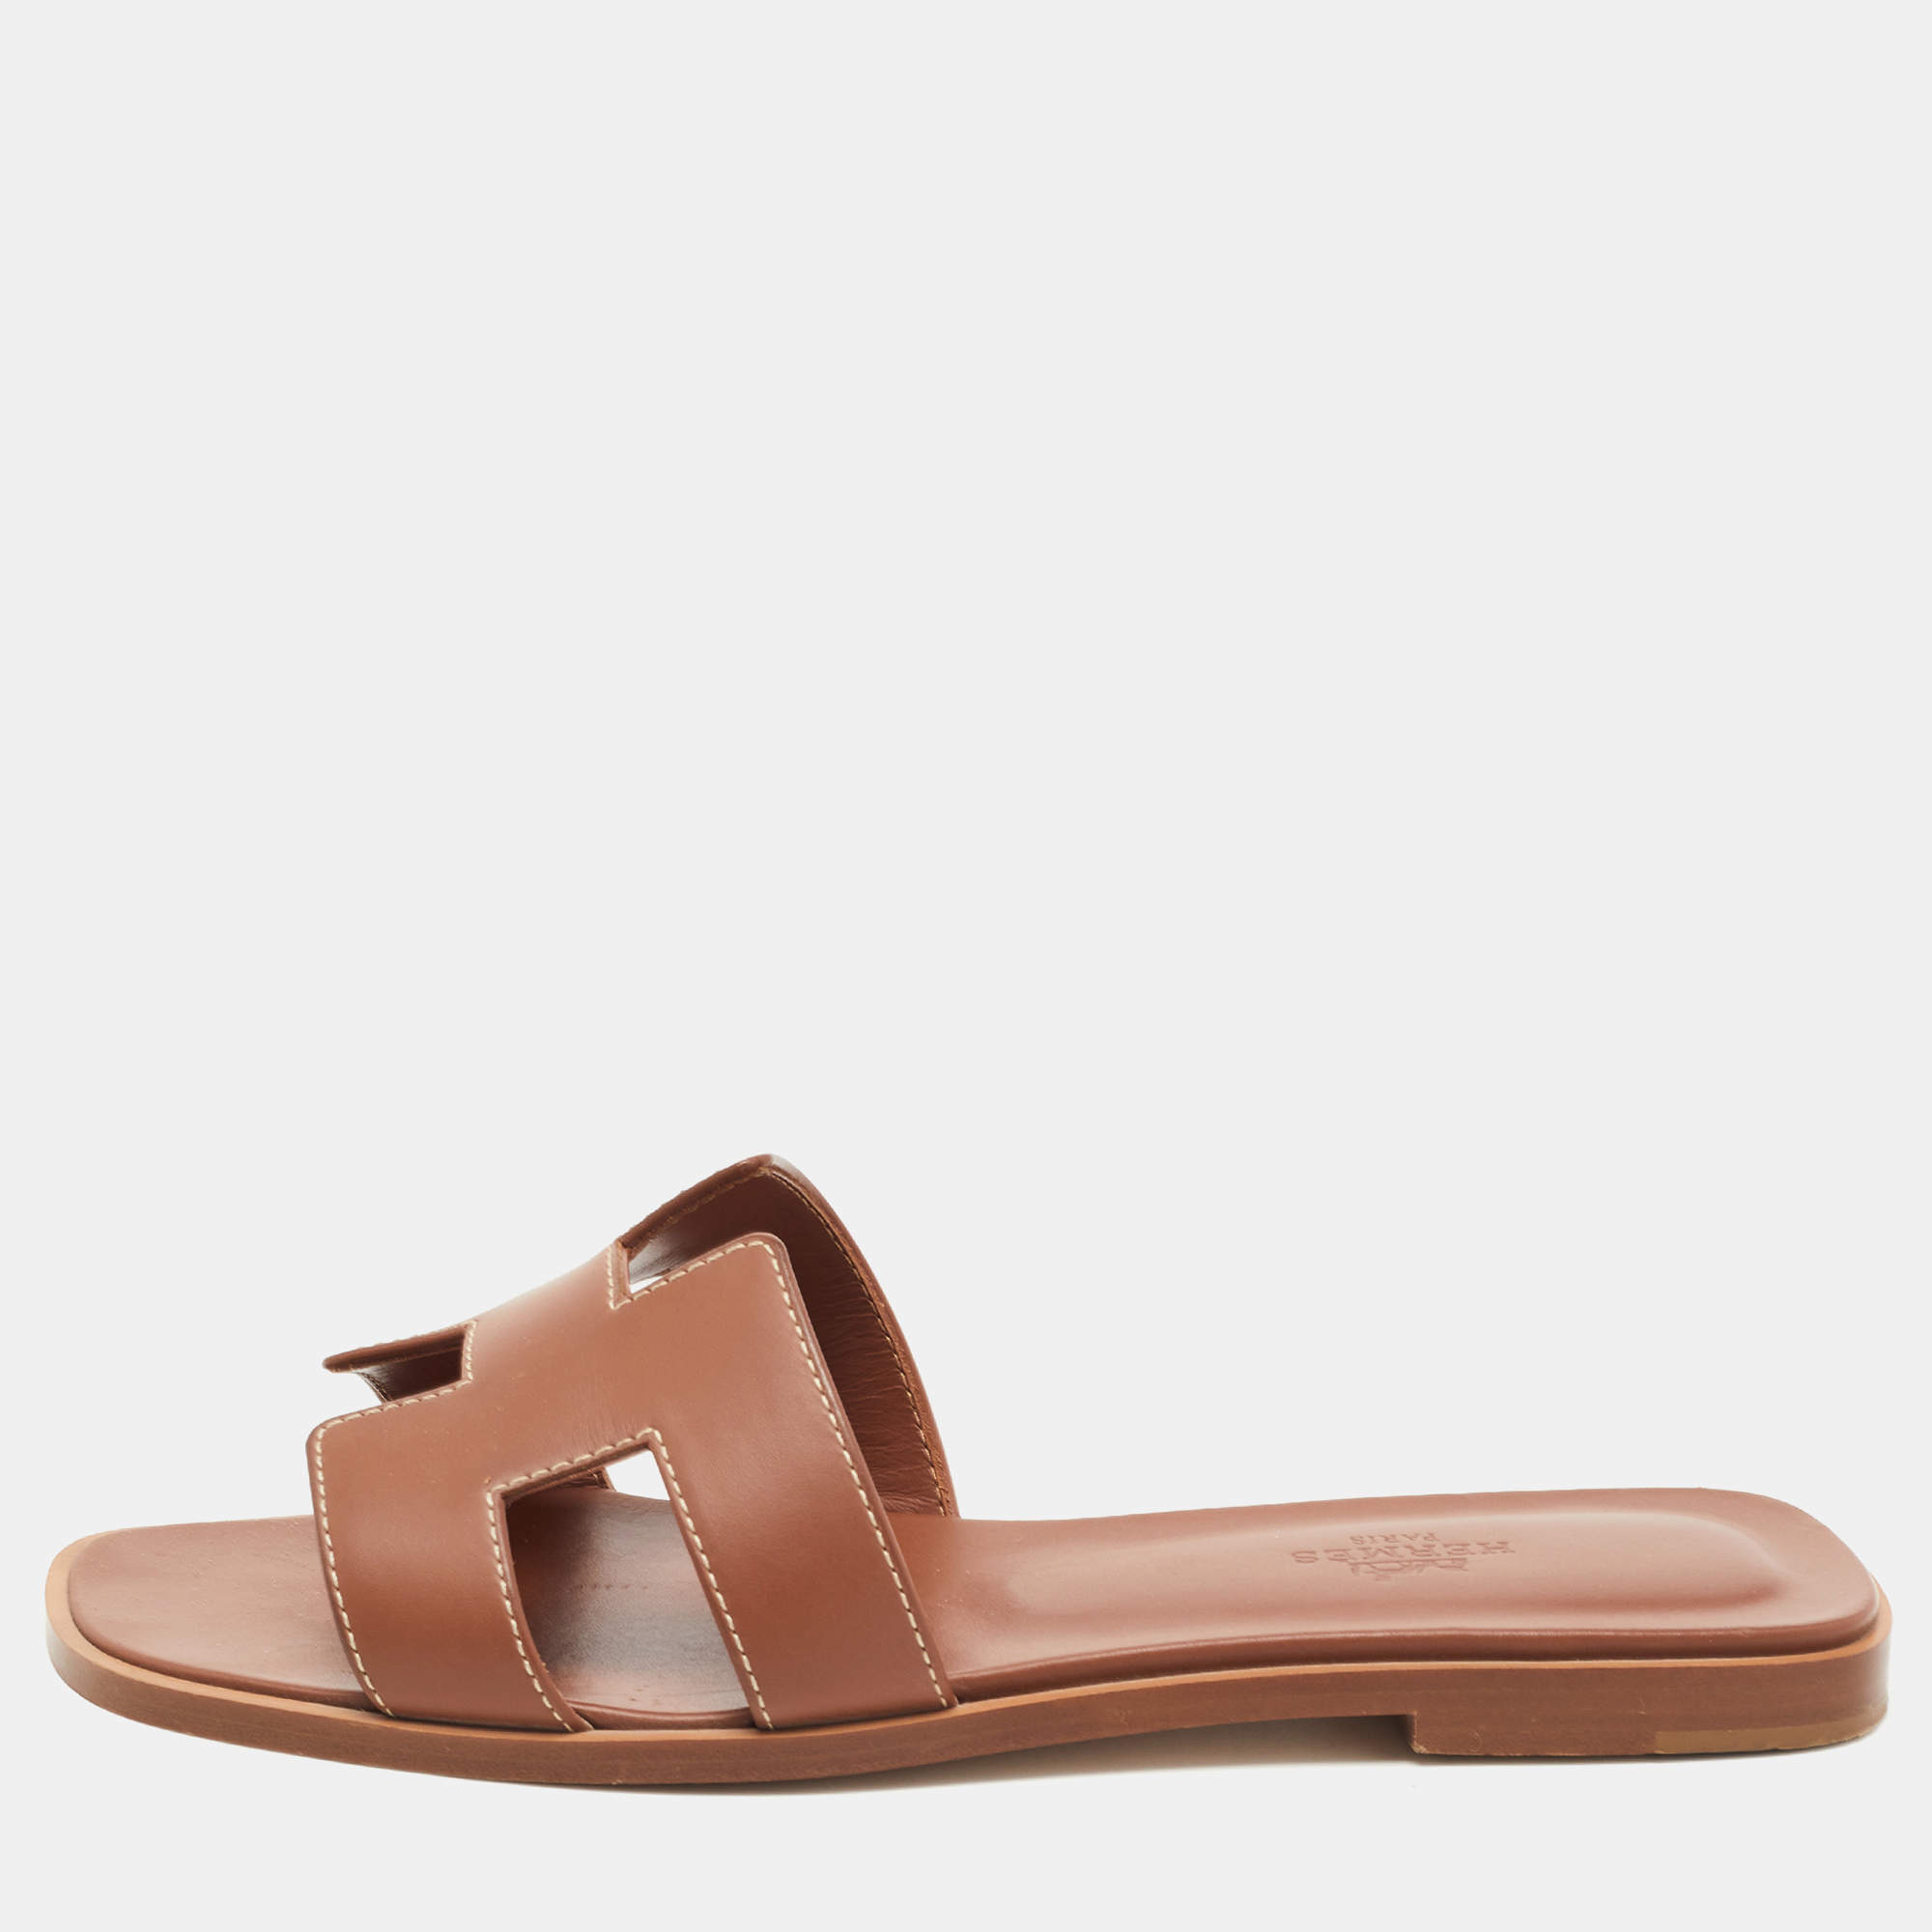 Hermes Brown Leather Oran Flat Slides Size 37 Hermes | The Luxury Closet